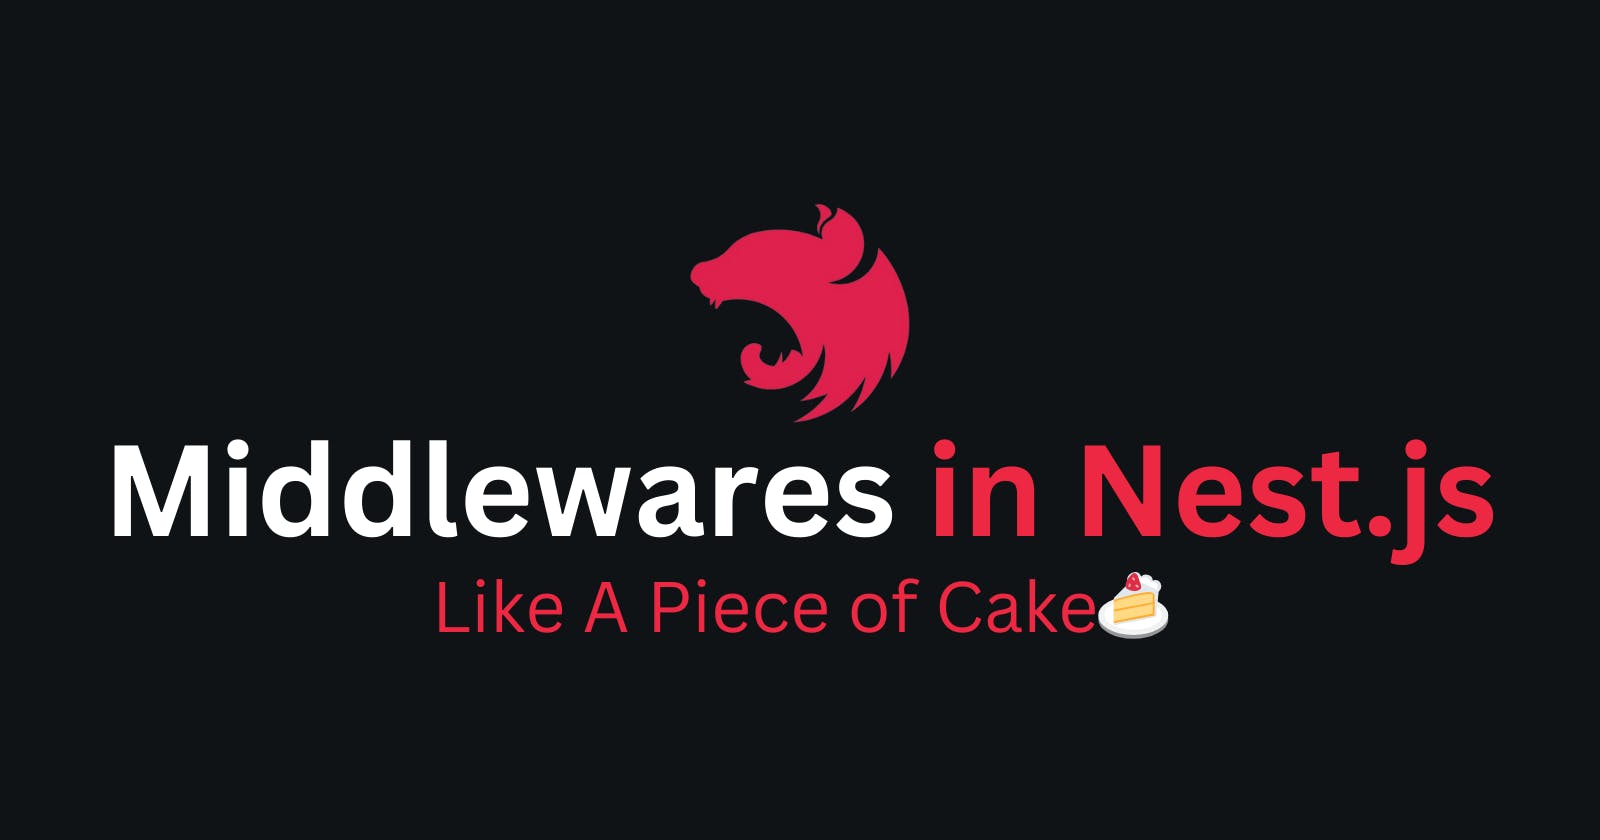 Middlewares in Nest.js: Like a Piece of Cake 🍰